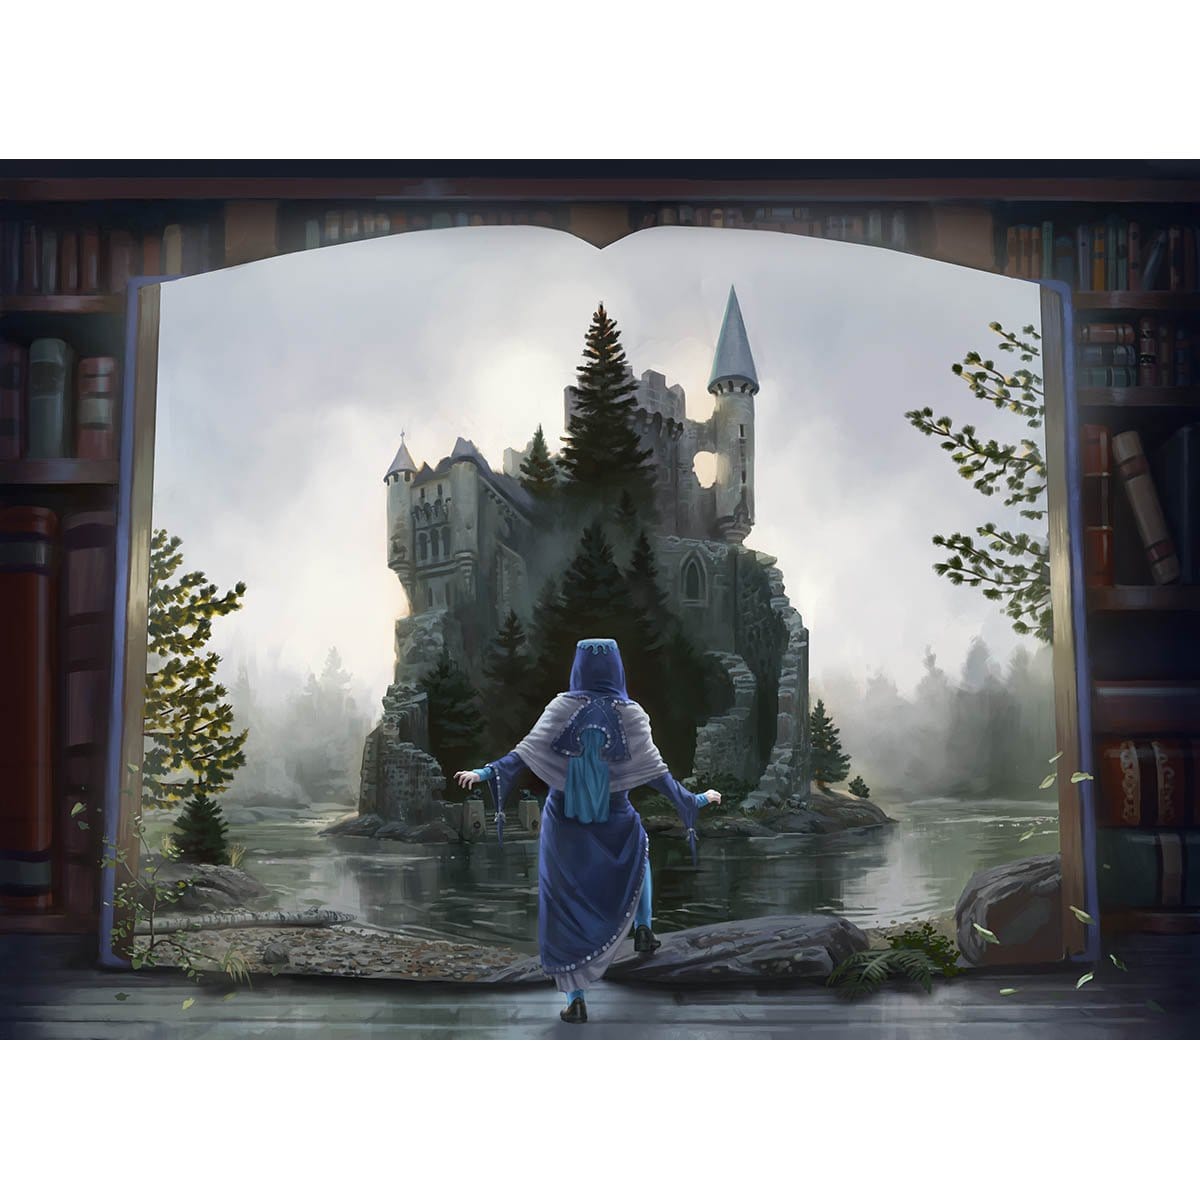 Into the Story Print - Print - Original Magic Art - Accessories for Magic the Gathering and other card games